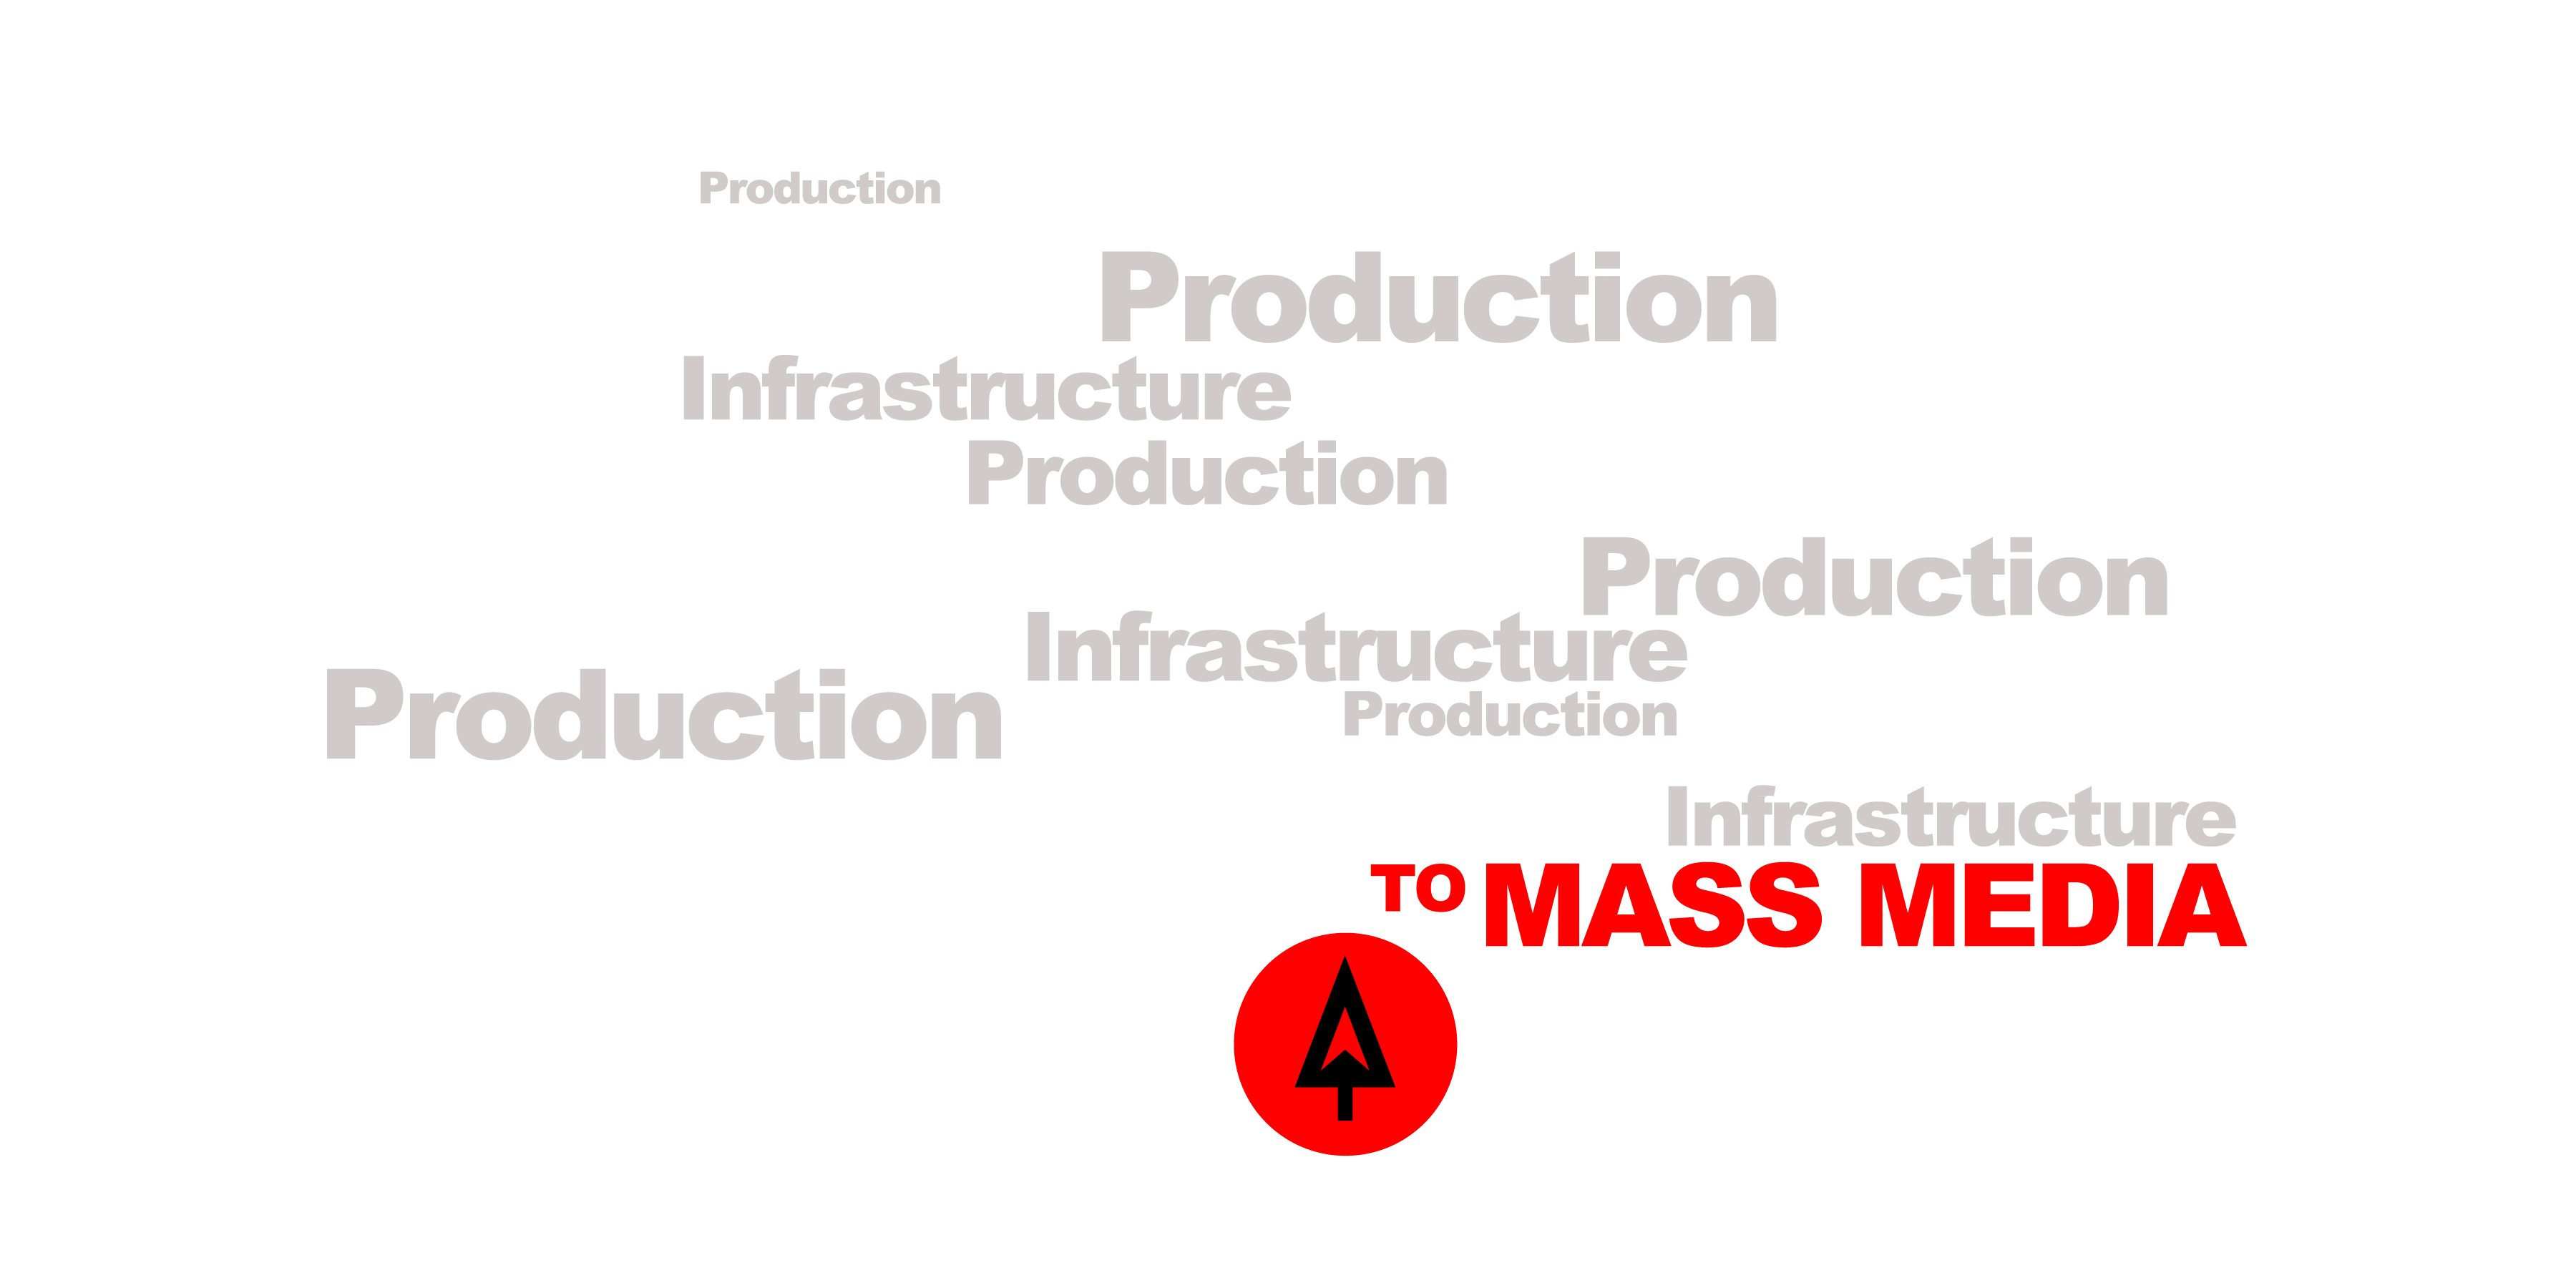 Video production services